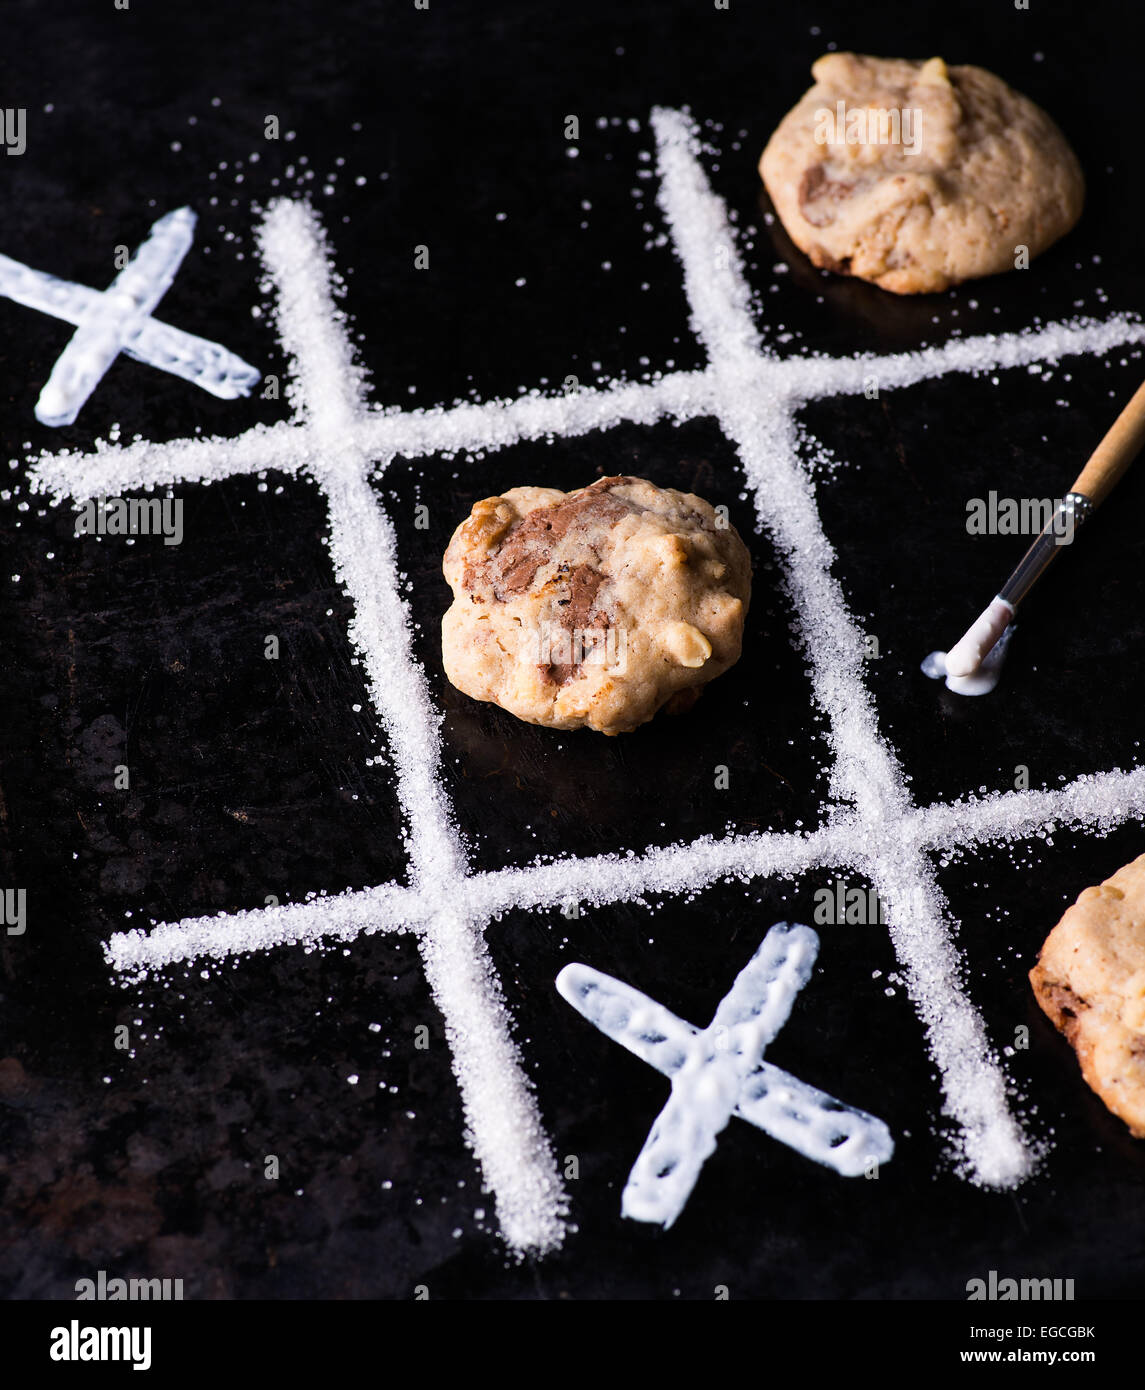 Chocolate chip cookies on noughts and crosses sugar grid, dark background, creative image, selective focus Stock Photo